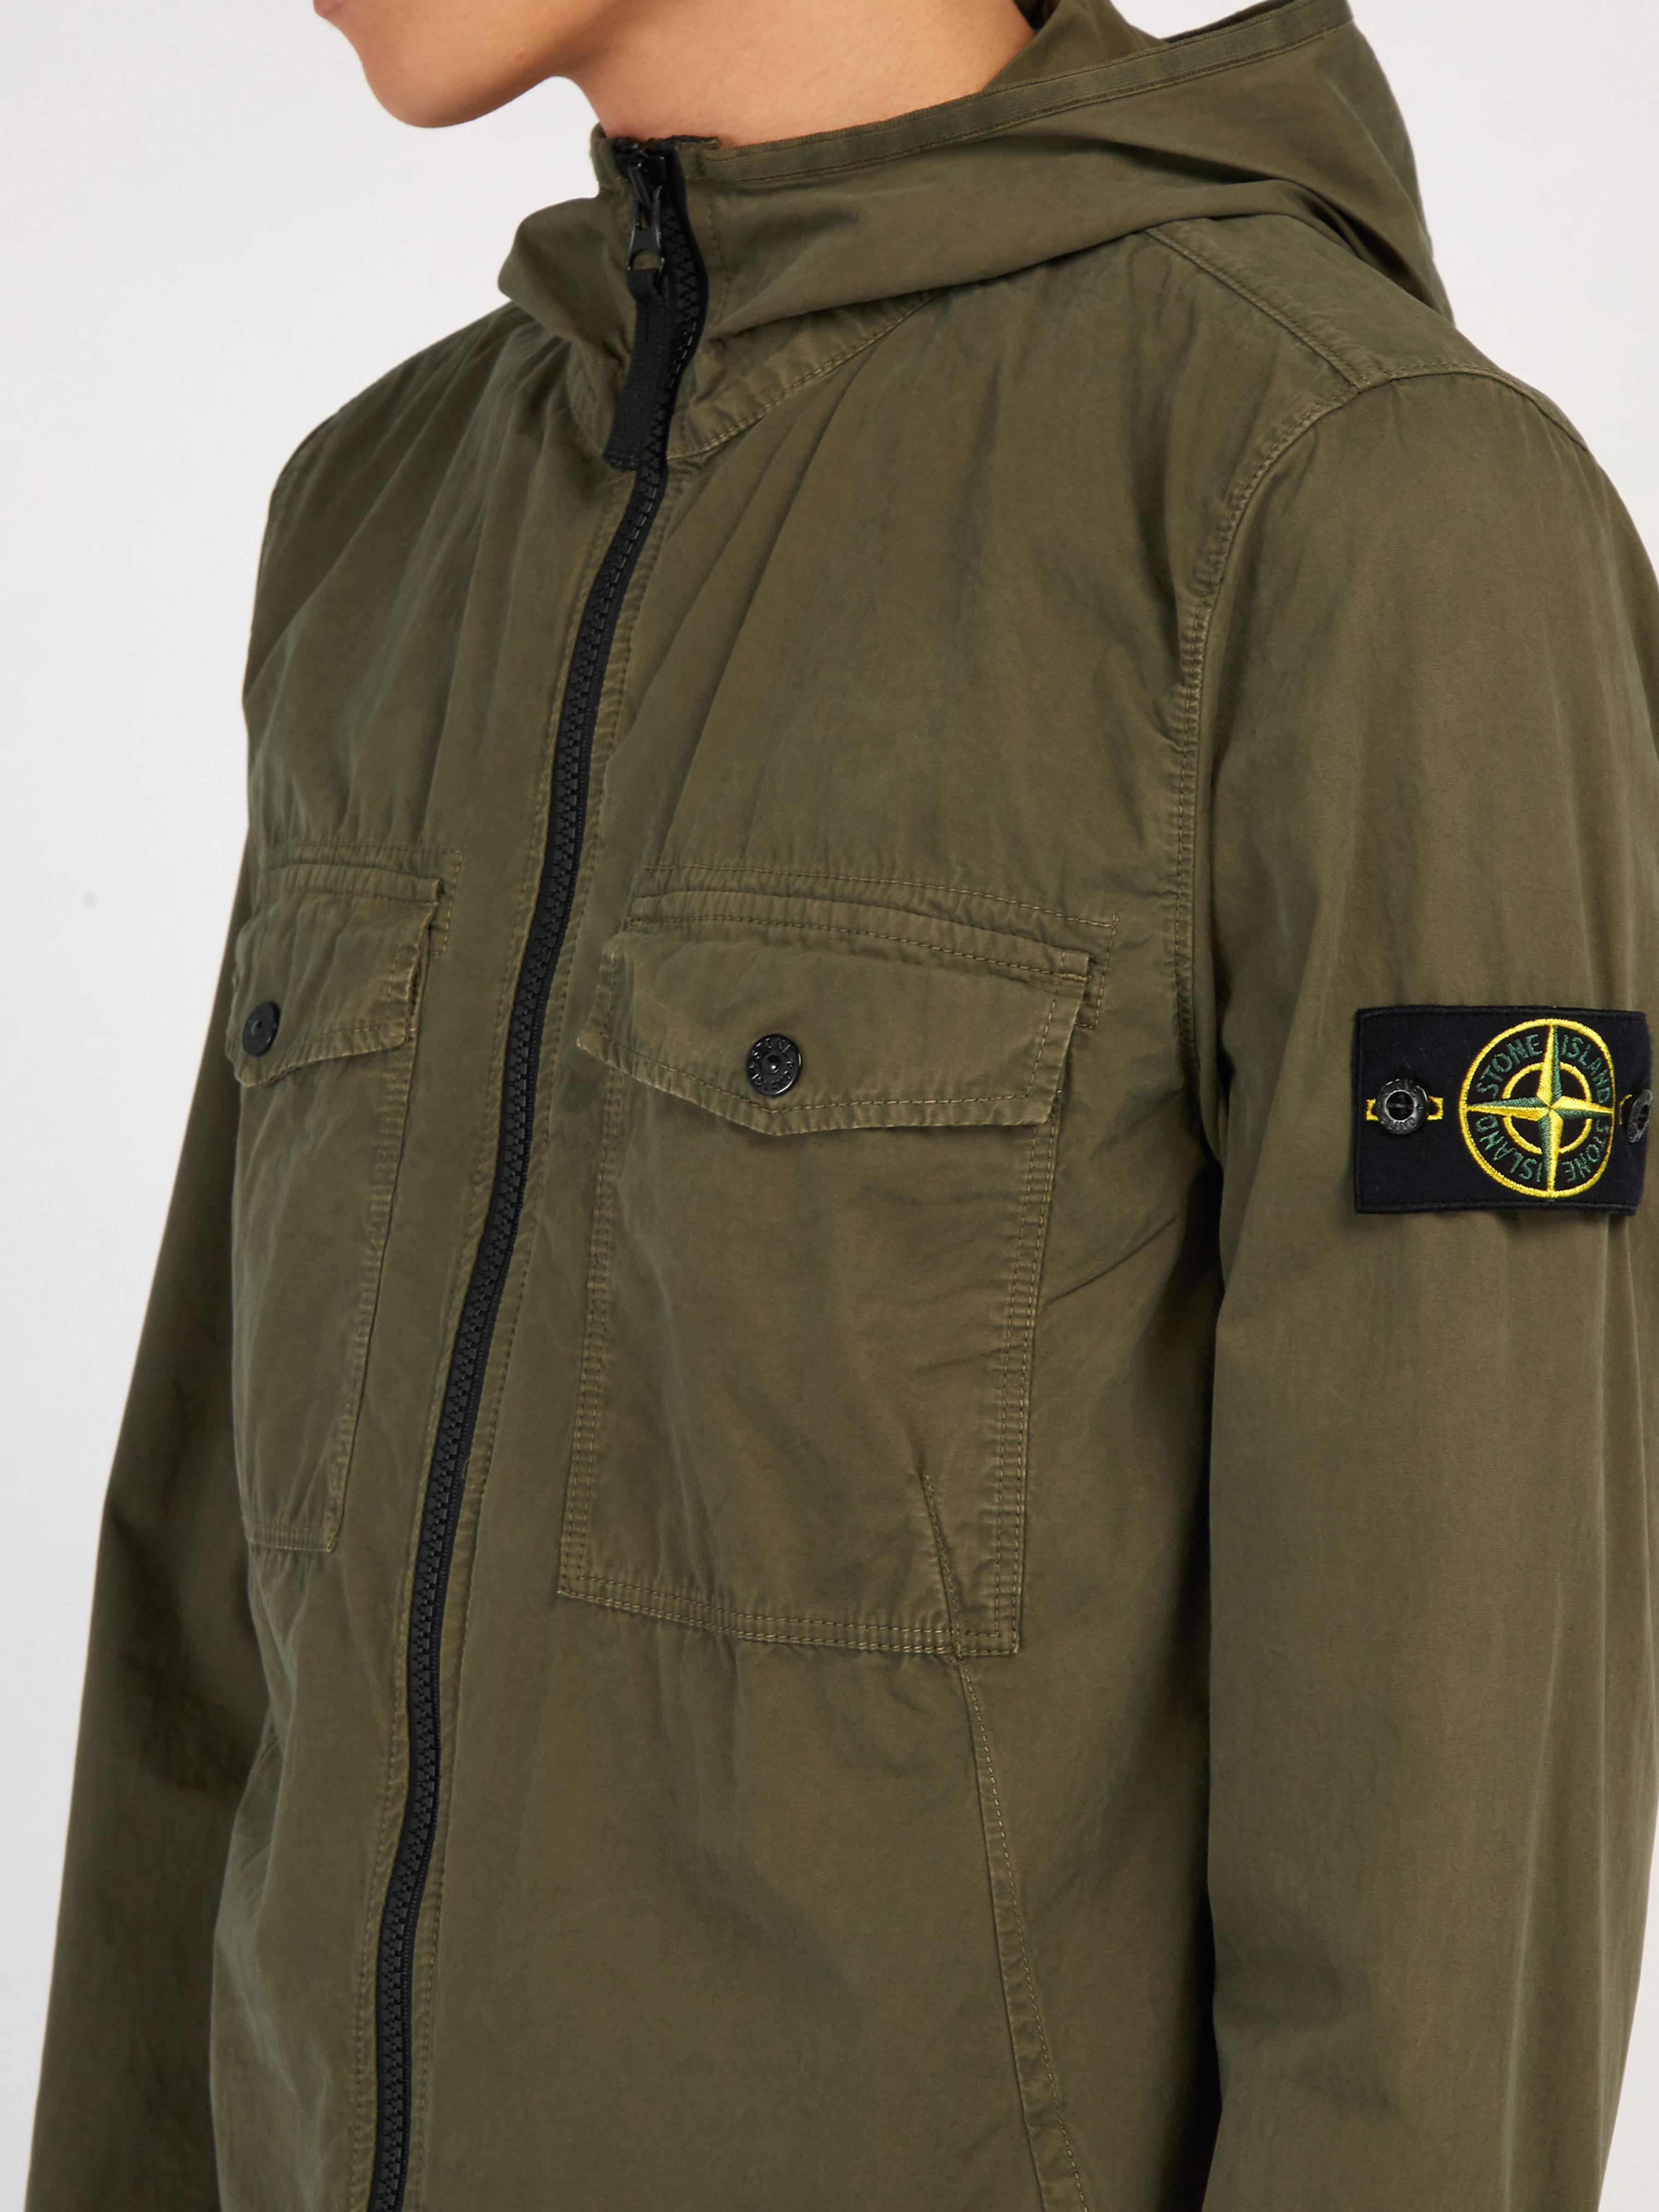 Stone Island Hooded Zip Through Cotton Overshirt in Green for Men - Lyst